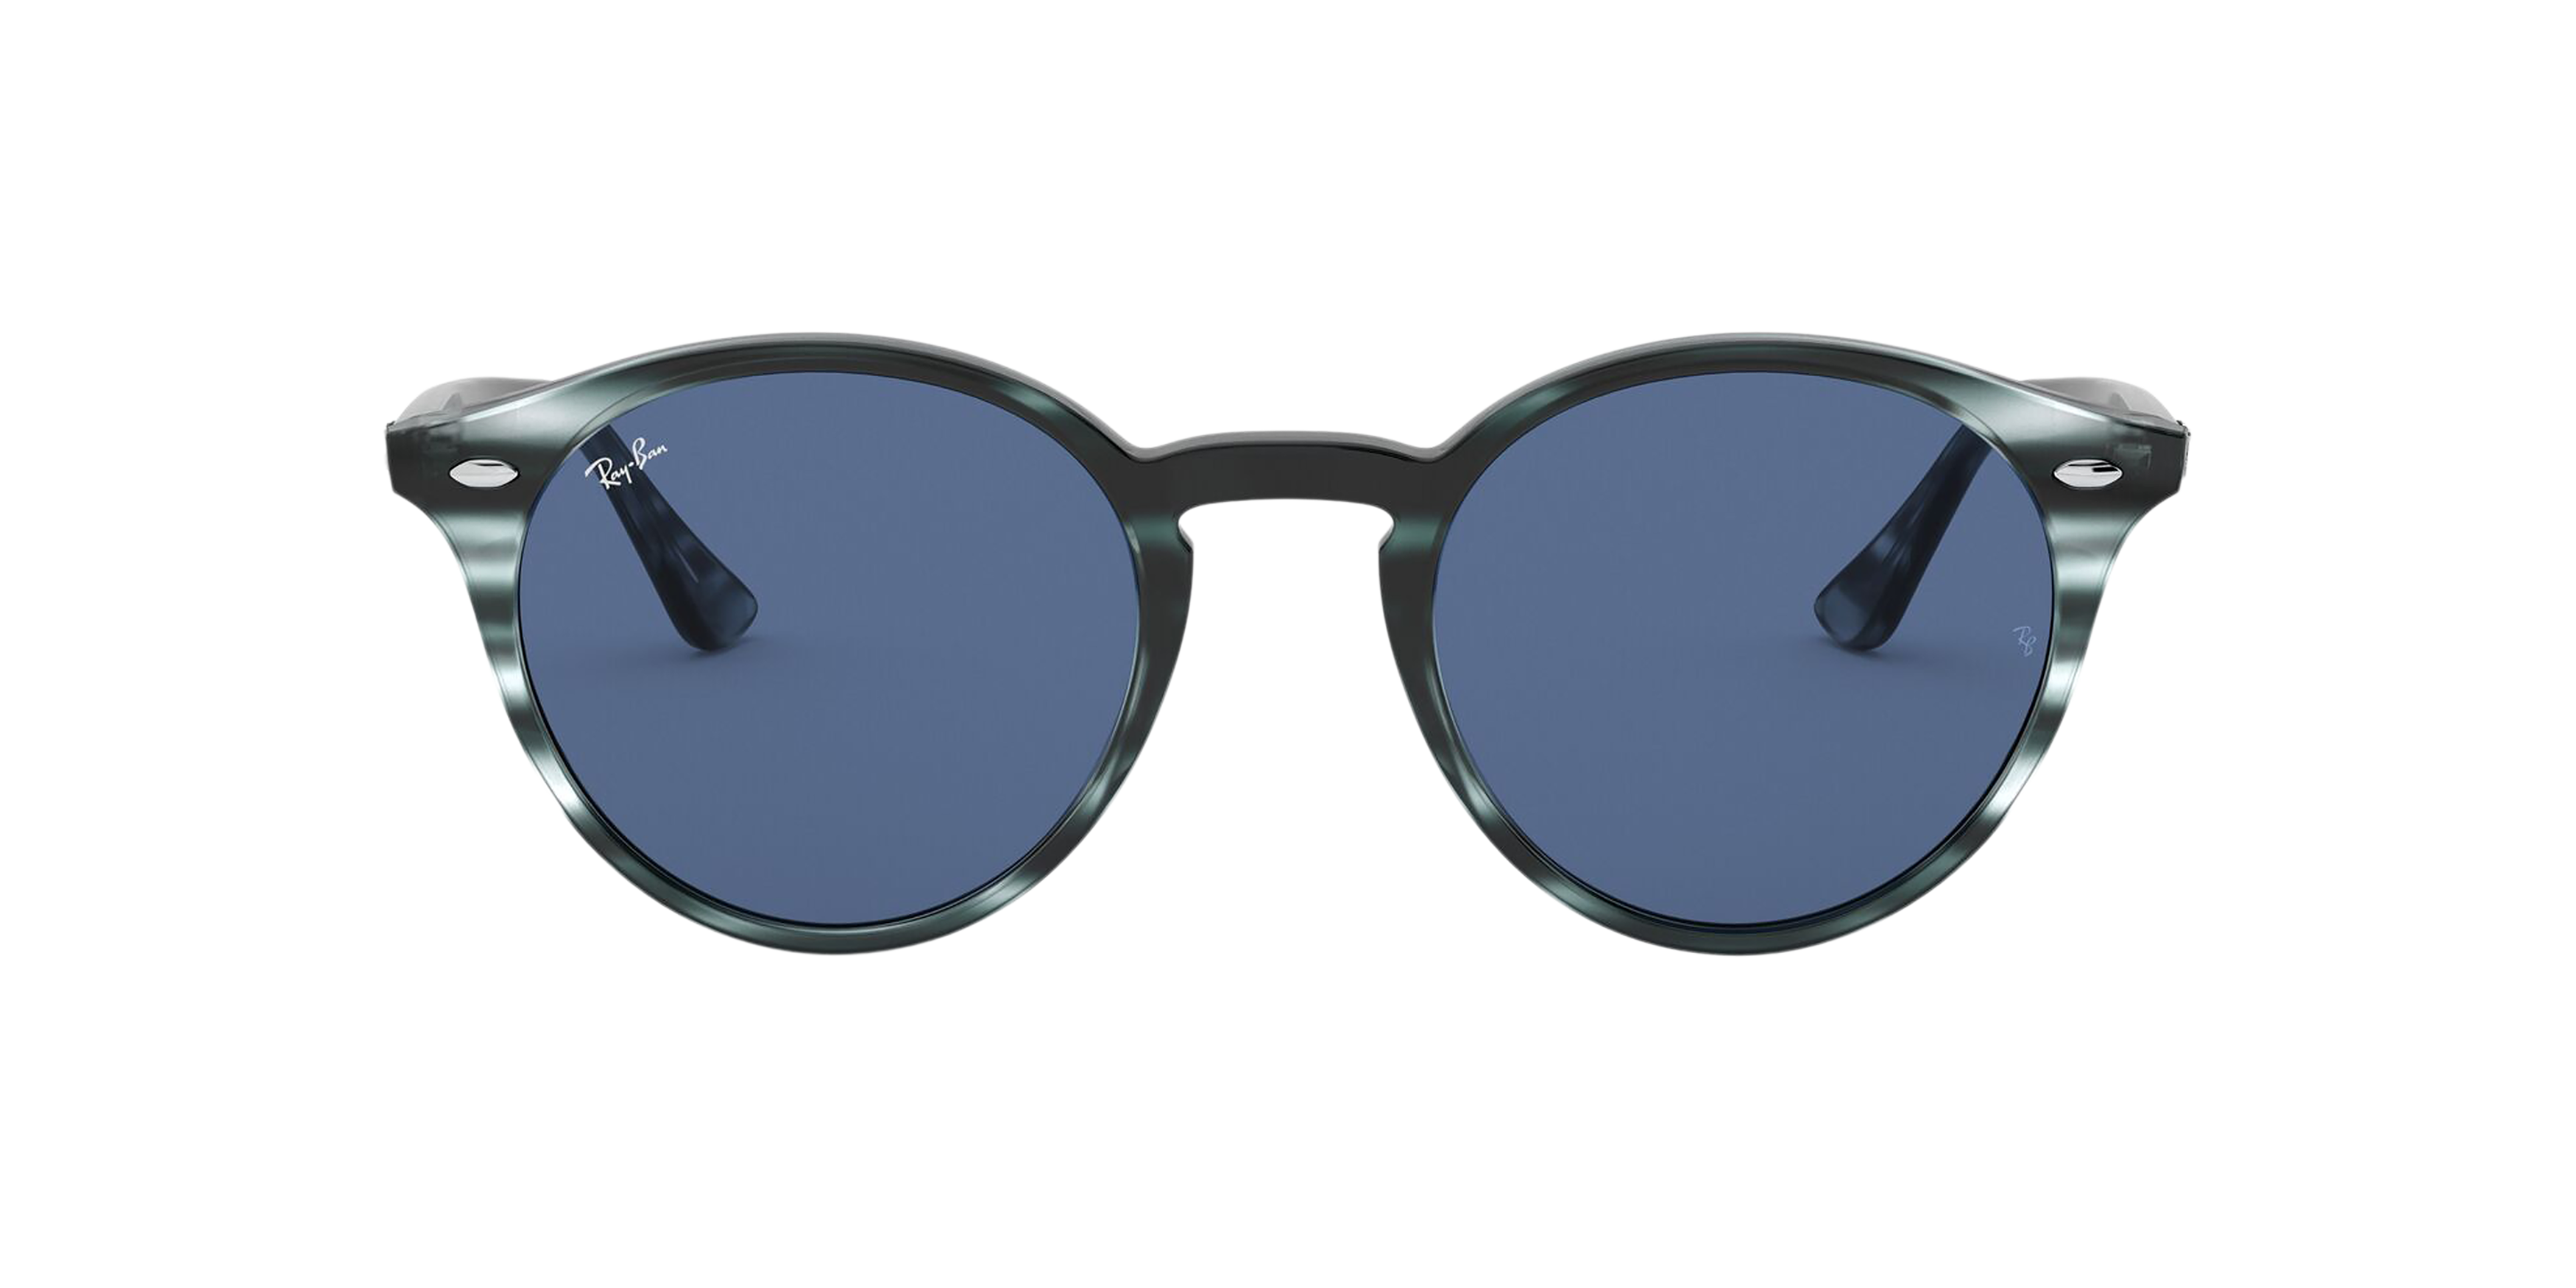 [products.image.front] Ray-Ban Round RB2180 643280